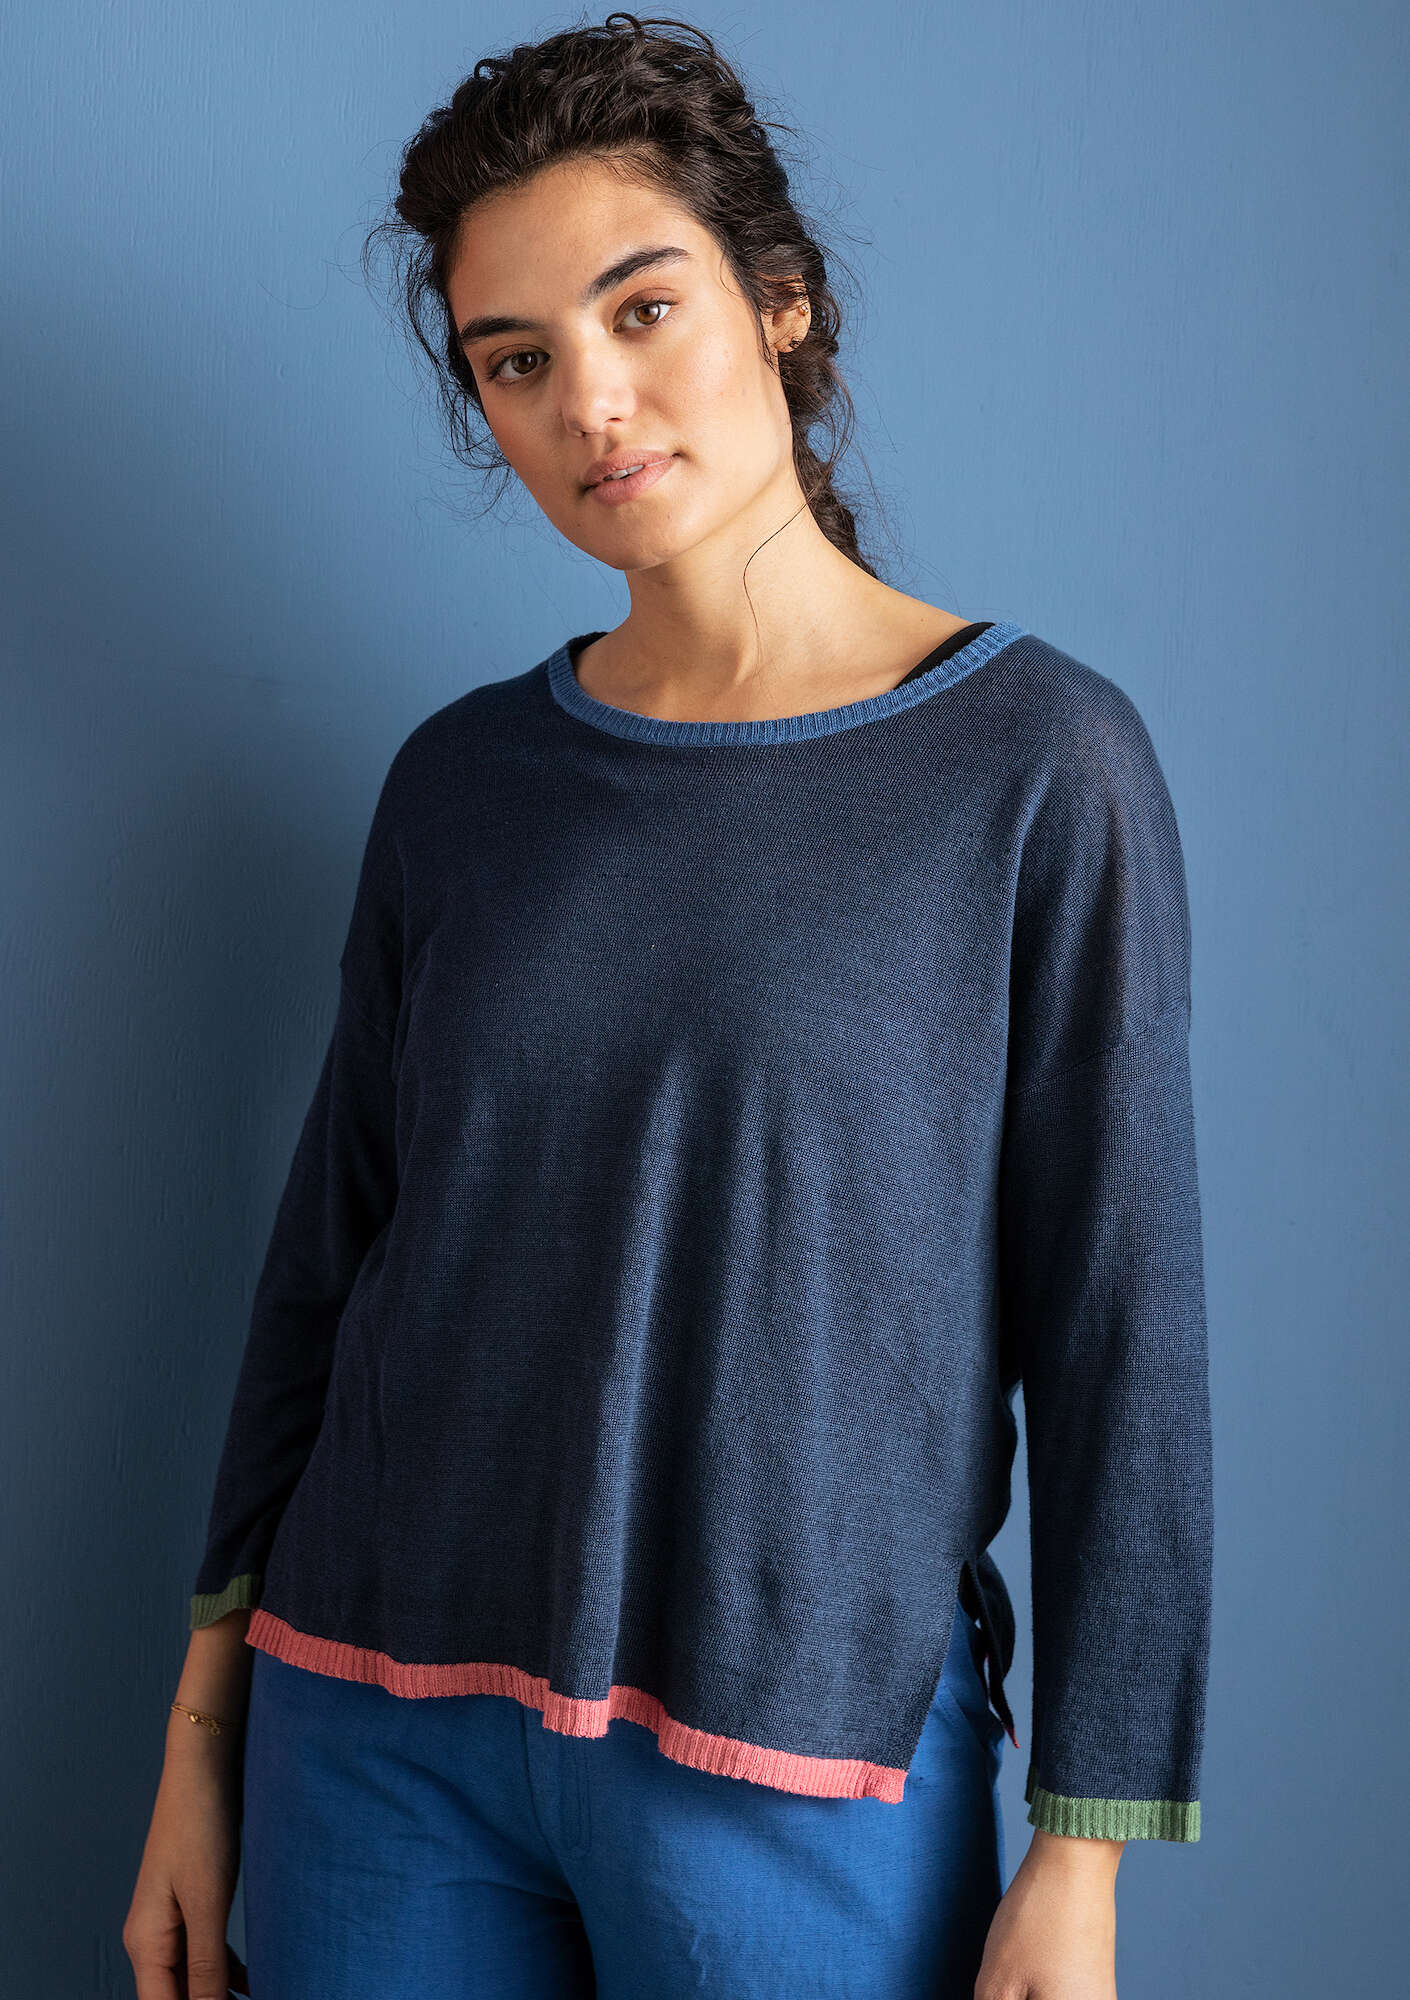 Long-sleeved knit sweater in recycled linen indigo